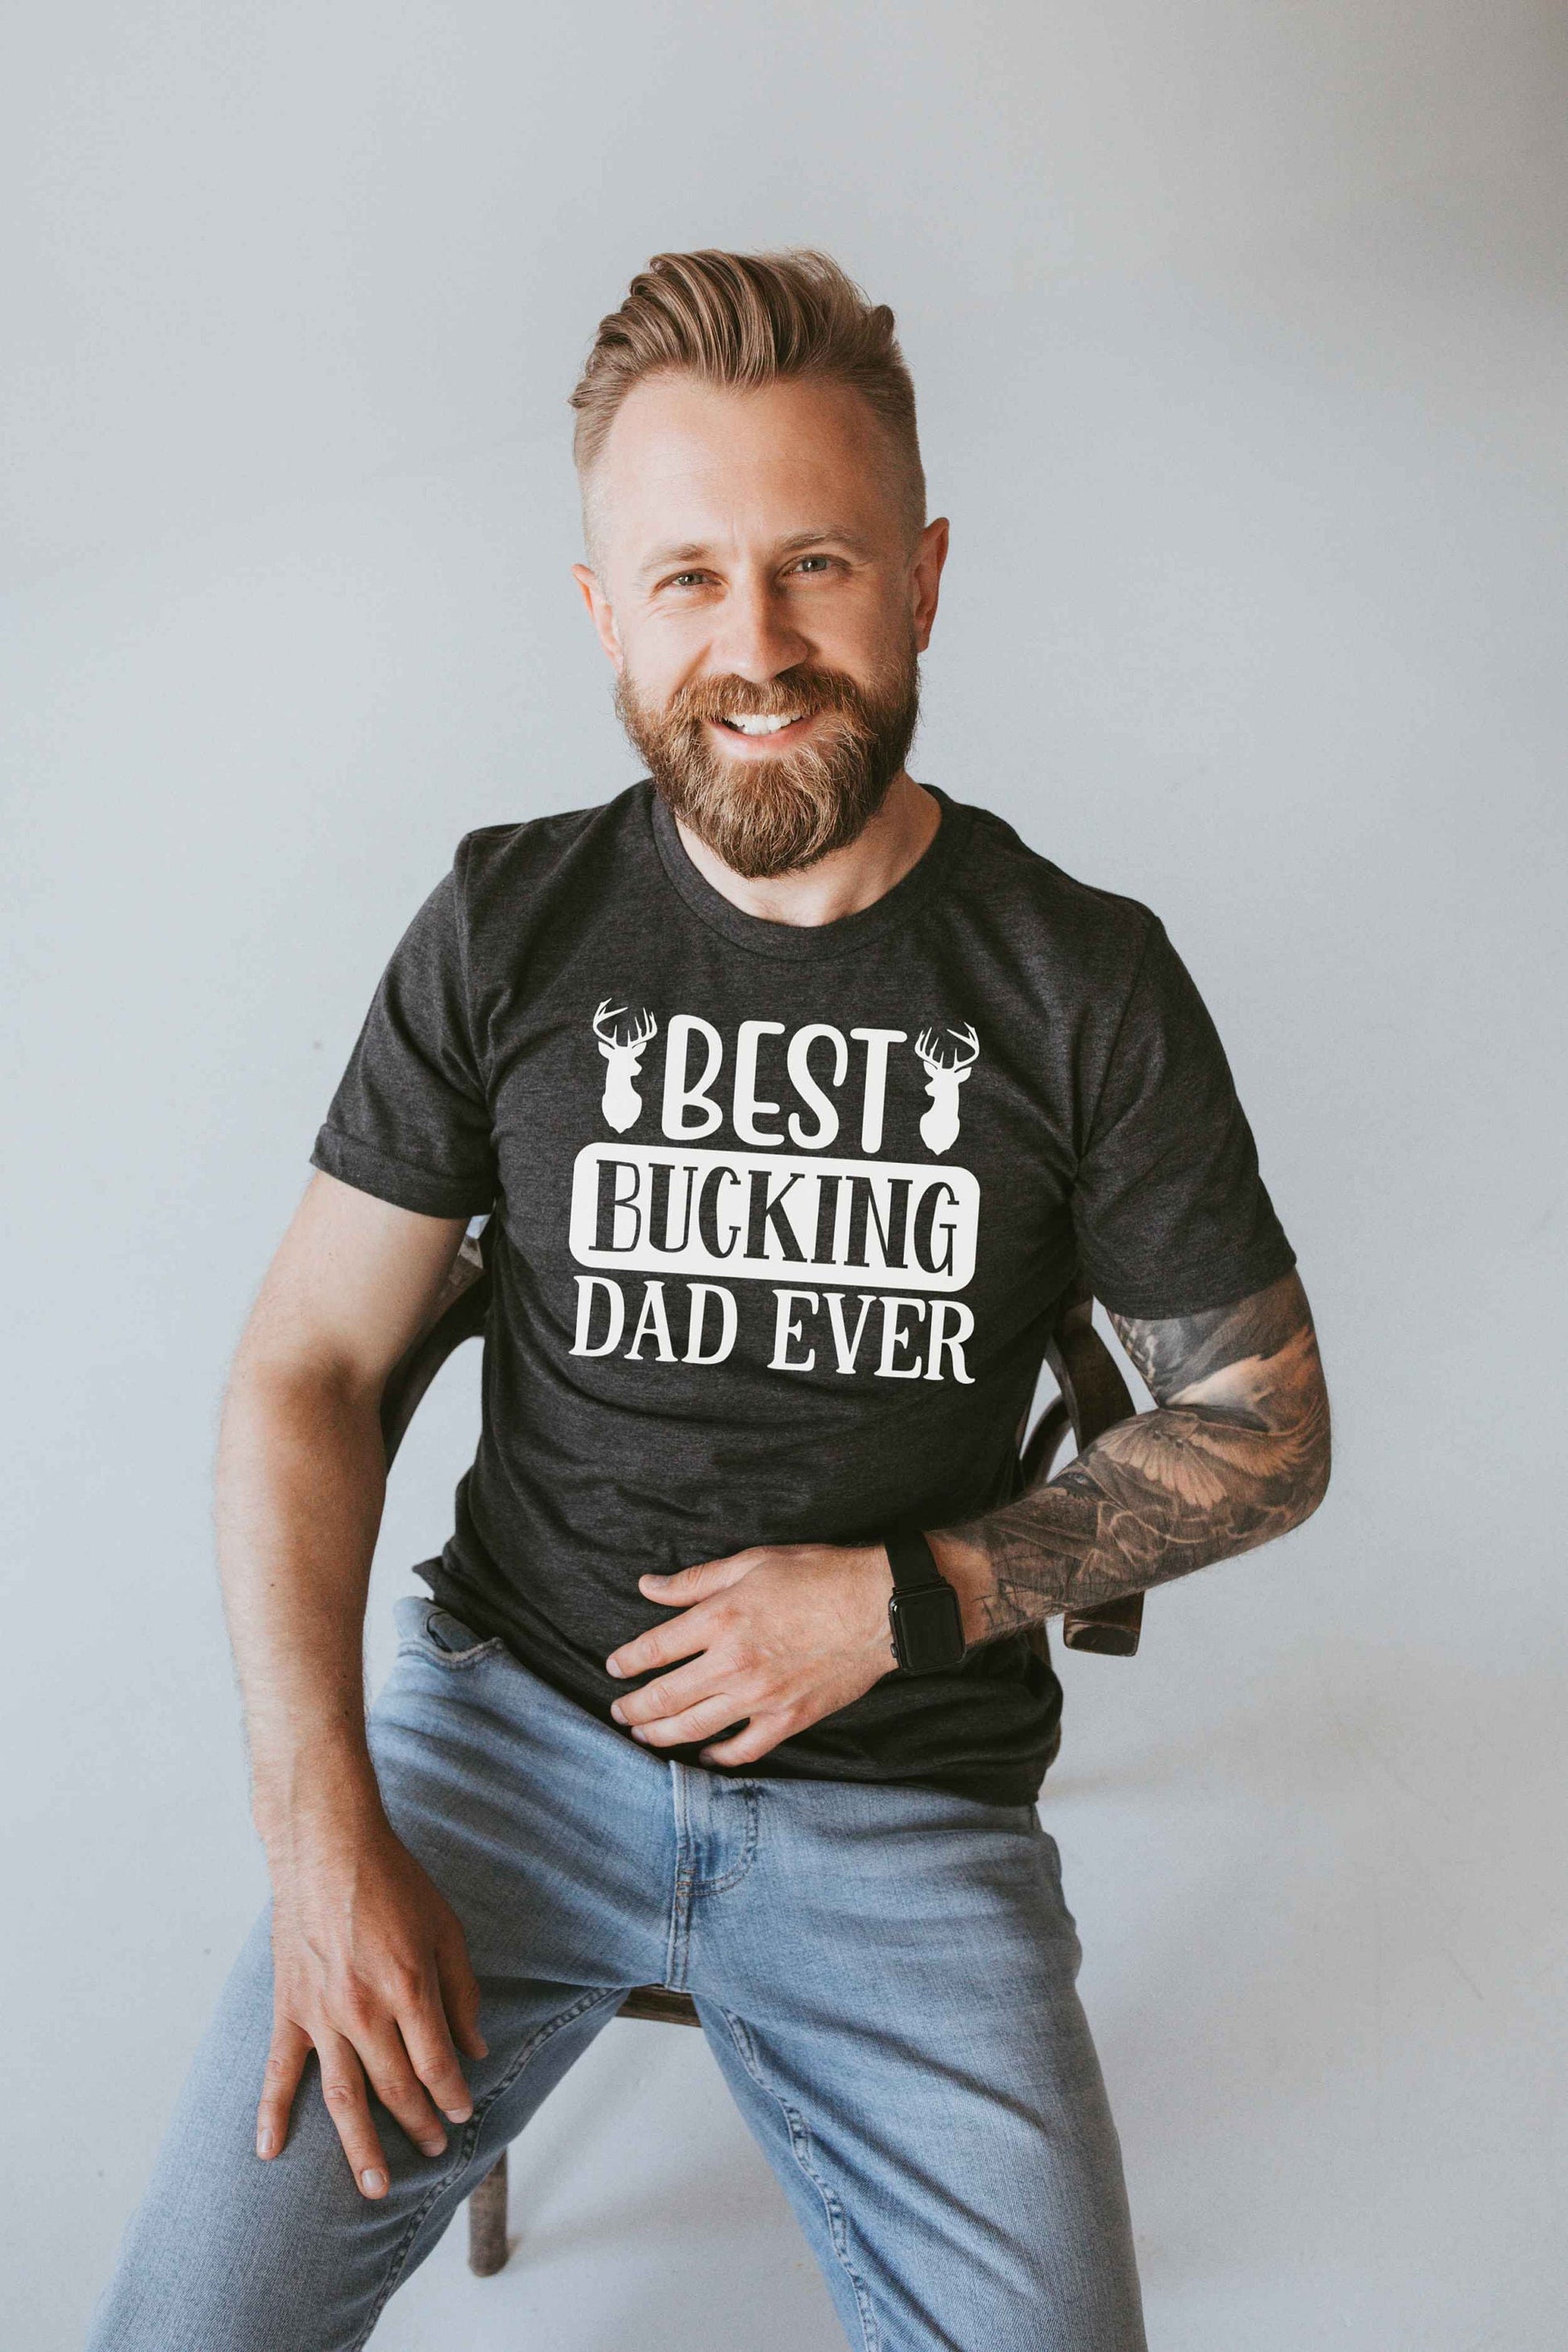 Best Bucking Dad Ever Shirt - Father's Day Shirt - Dad Shirt - Gifts for Dad - Dad Birthday Gift - Dad T-Shirt